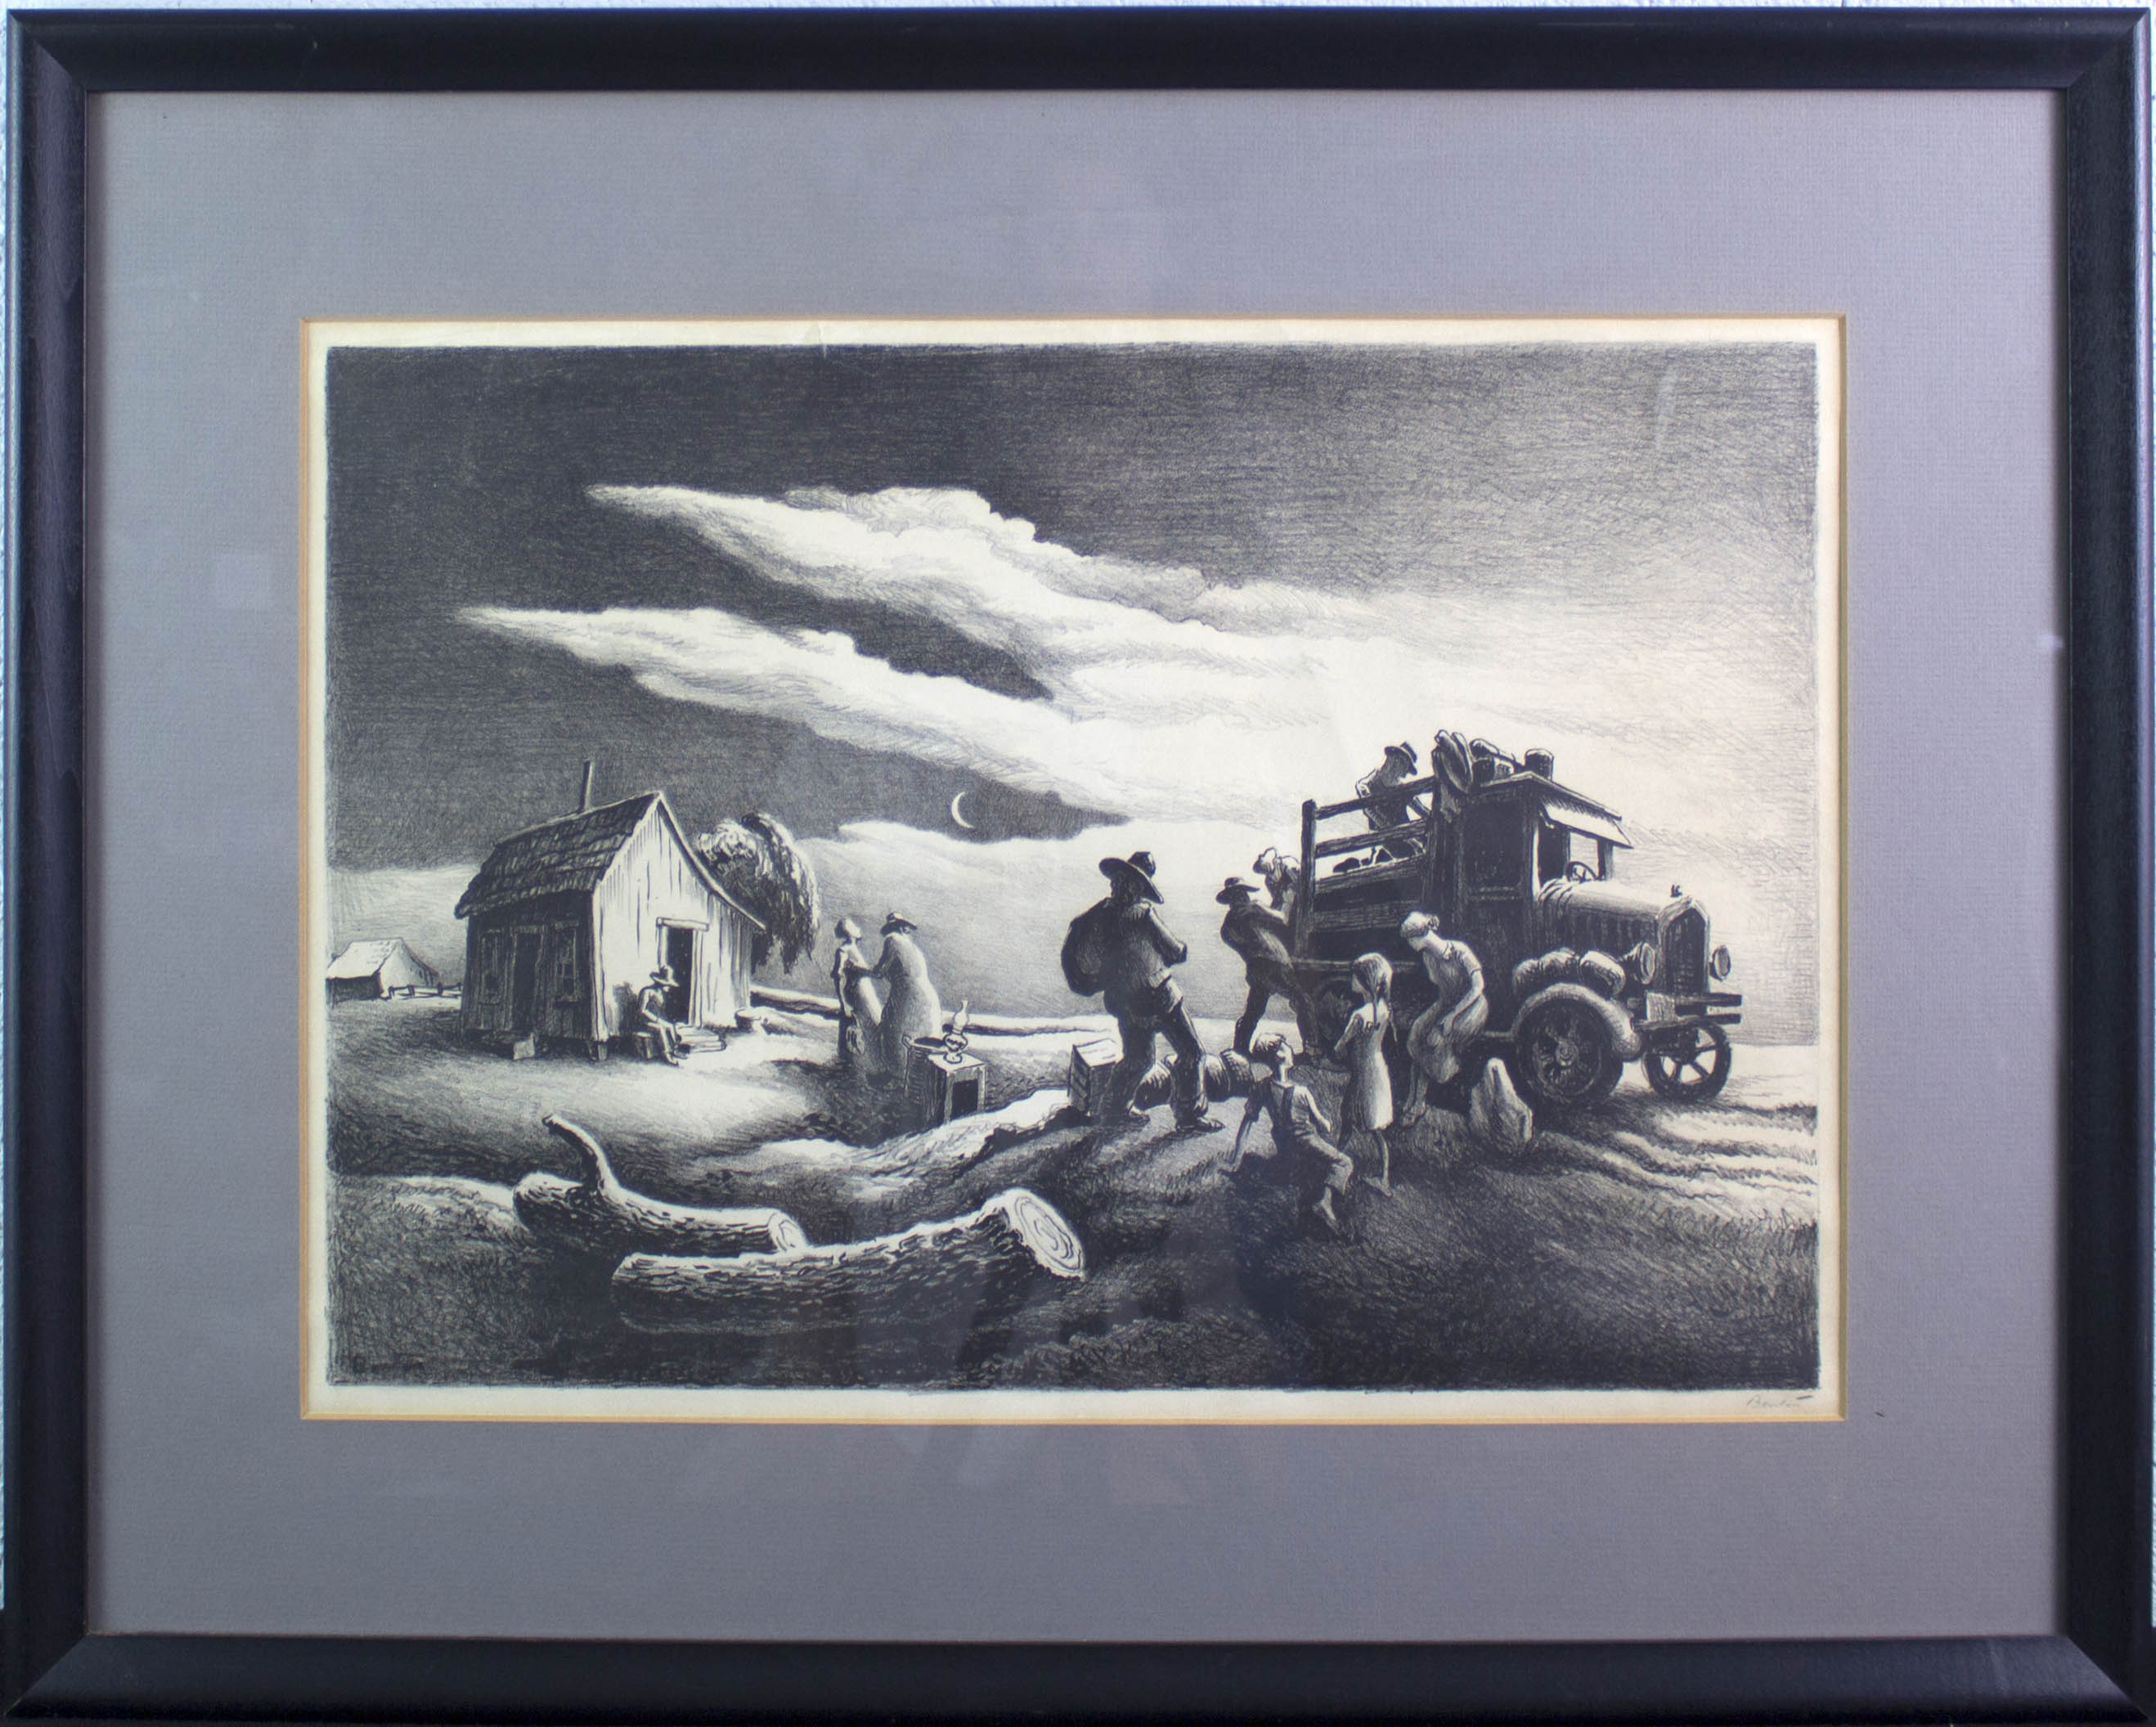 Lithograph on paper of a group of people loading a truck on the countryside. It is nighttime and a crescent moon is in the sky behind a few clouds. There is a small cabin in the background on the left.